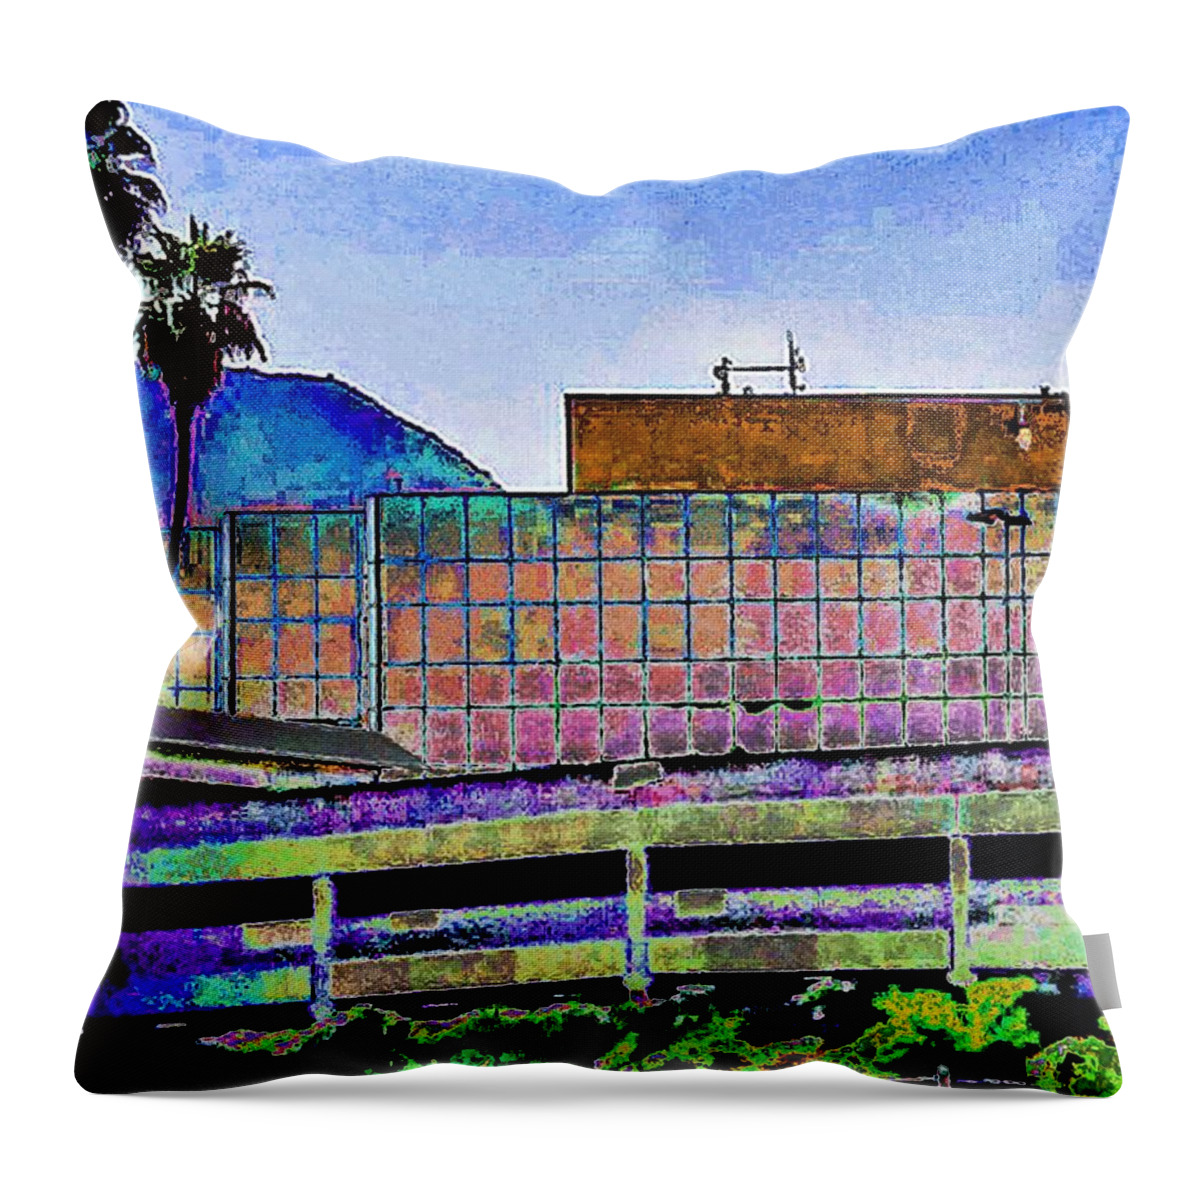 Architecture Throw Pillow featuring the photograph Architectural Classic by Andrew Lawrence